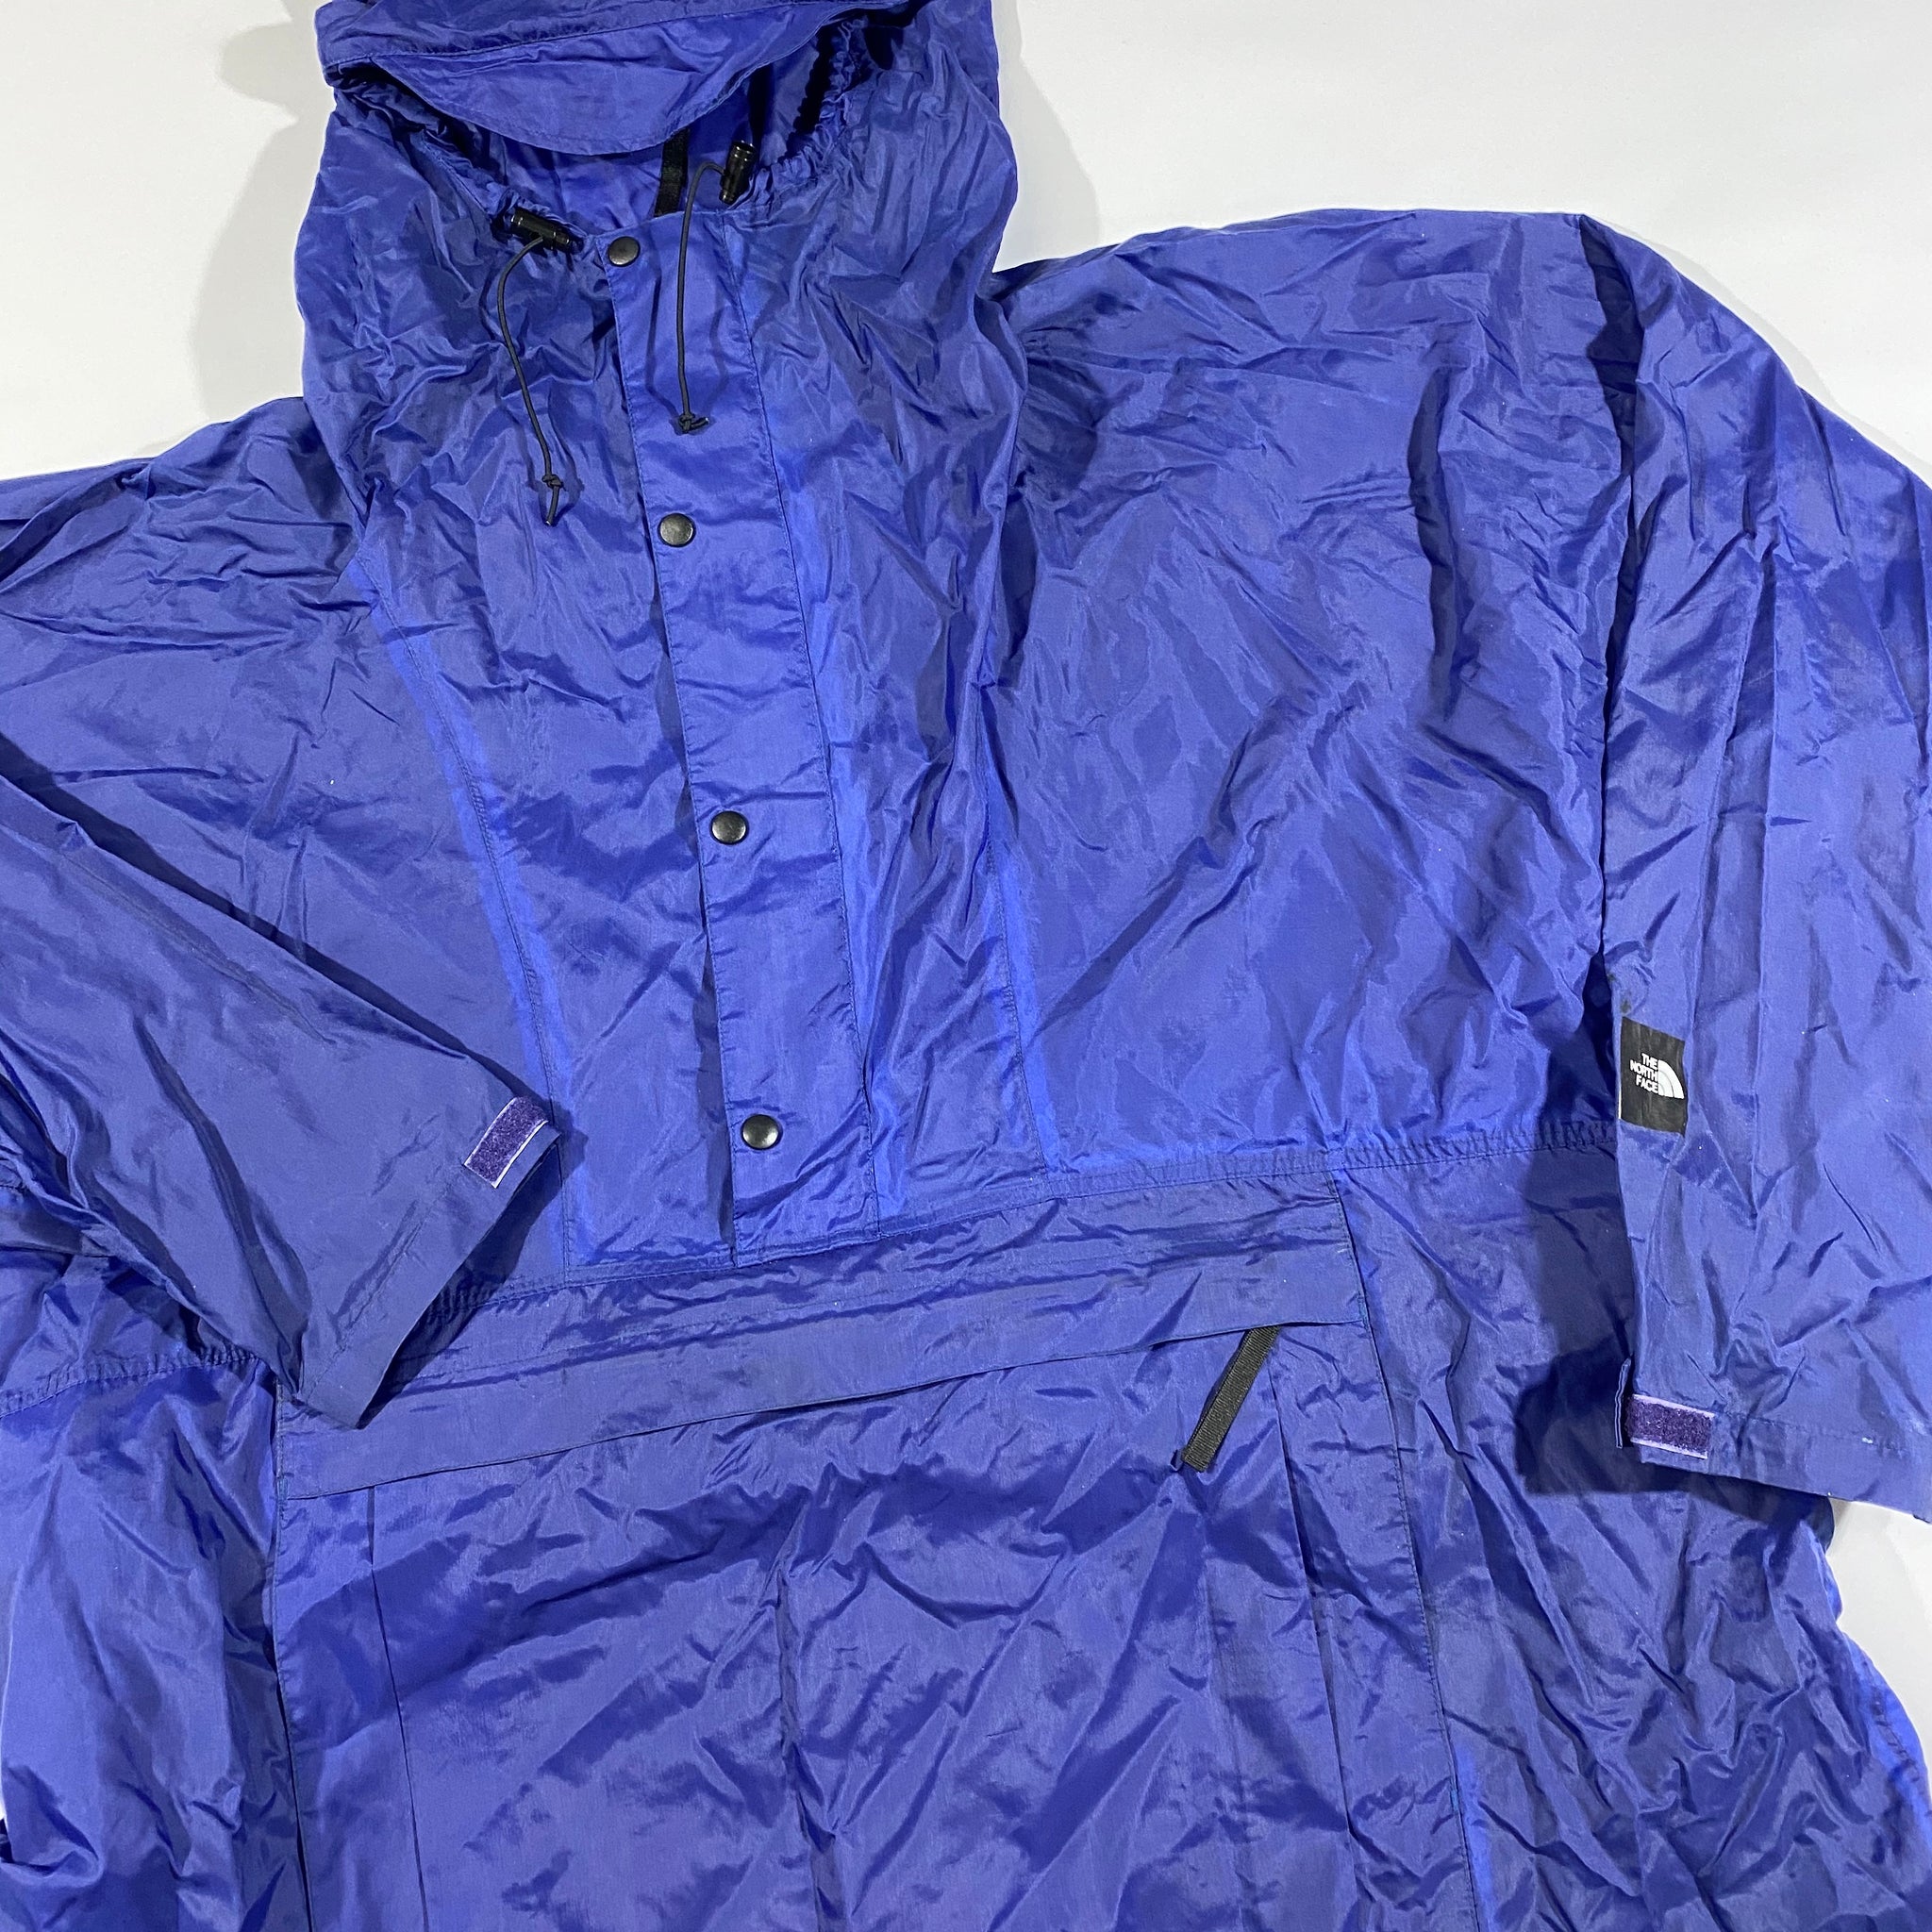 90s Northface rain jacket. folds up with snaps to become regular length large